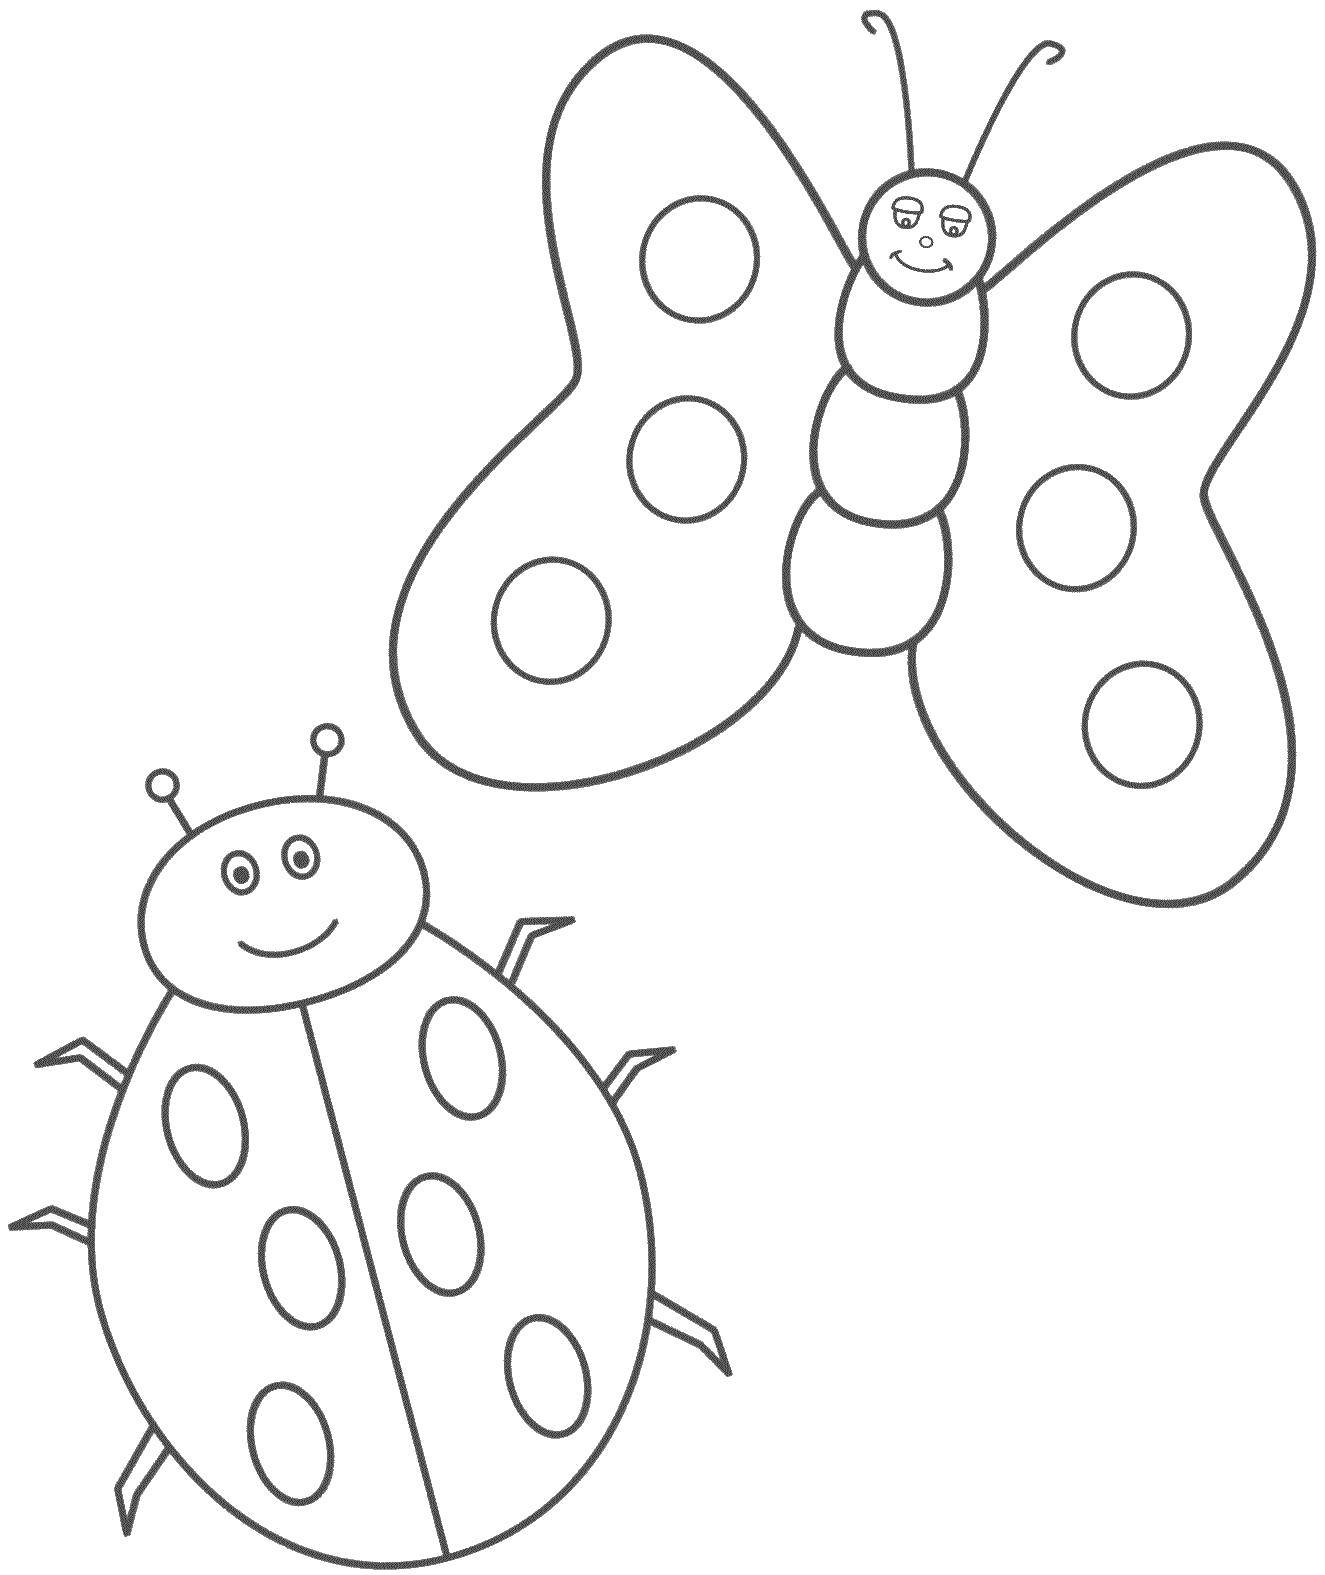 Coloring Butterfly and ladybug. Category Insects. Tags:  insects, ladybug, butterfly.